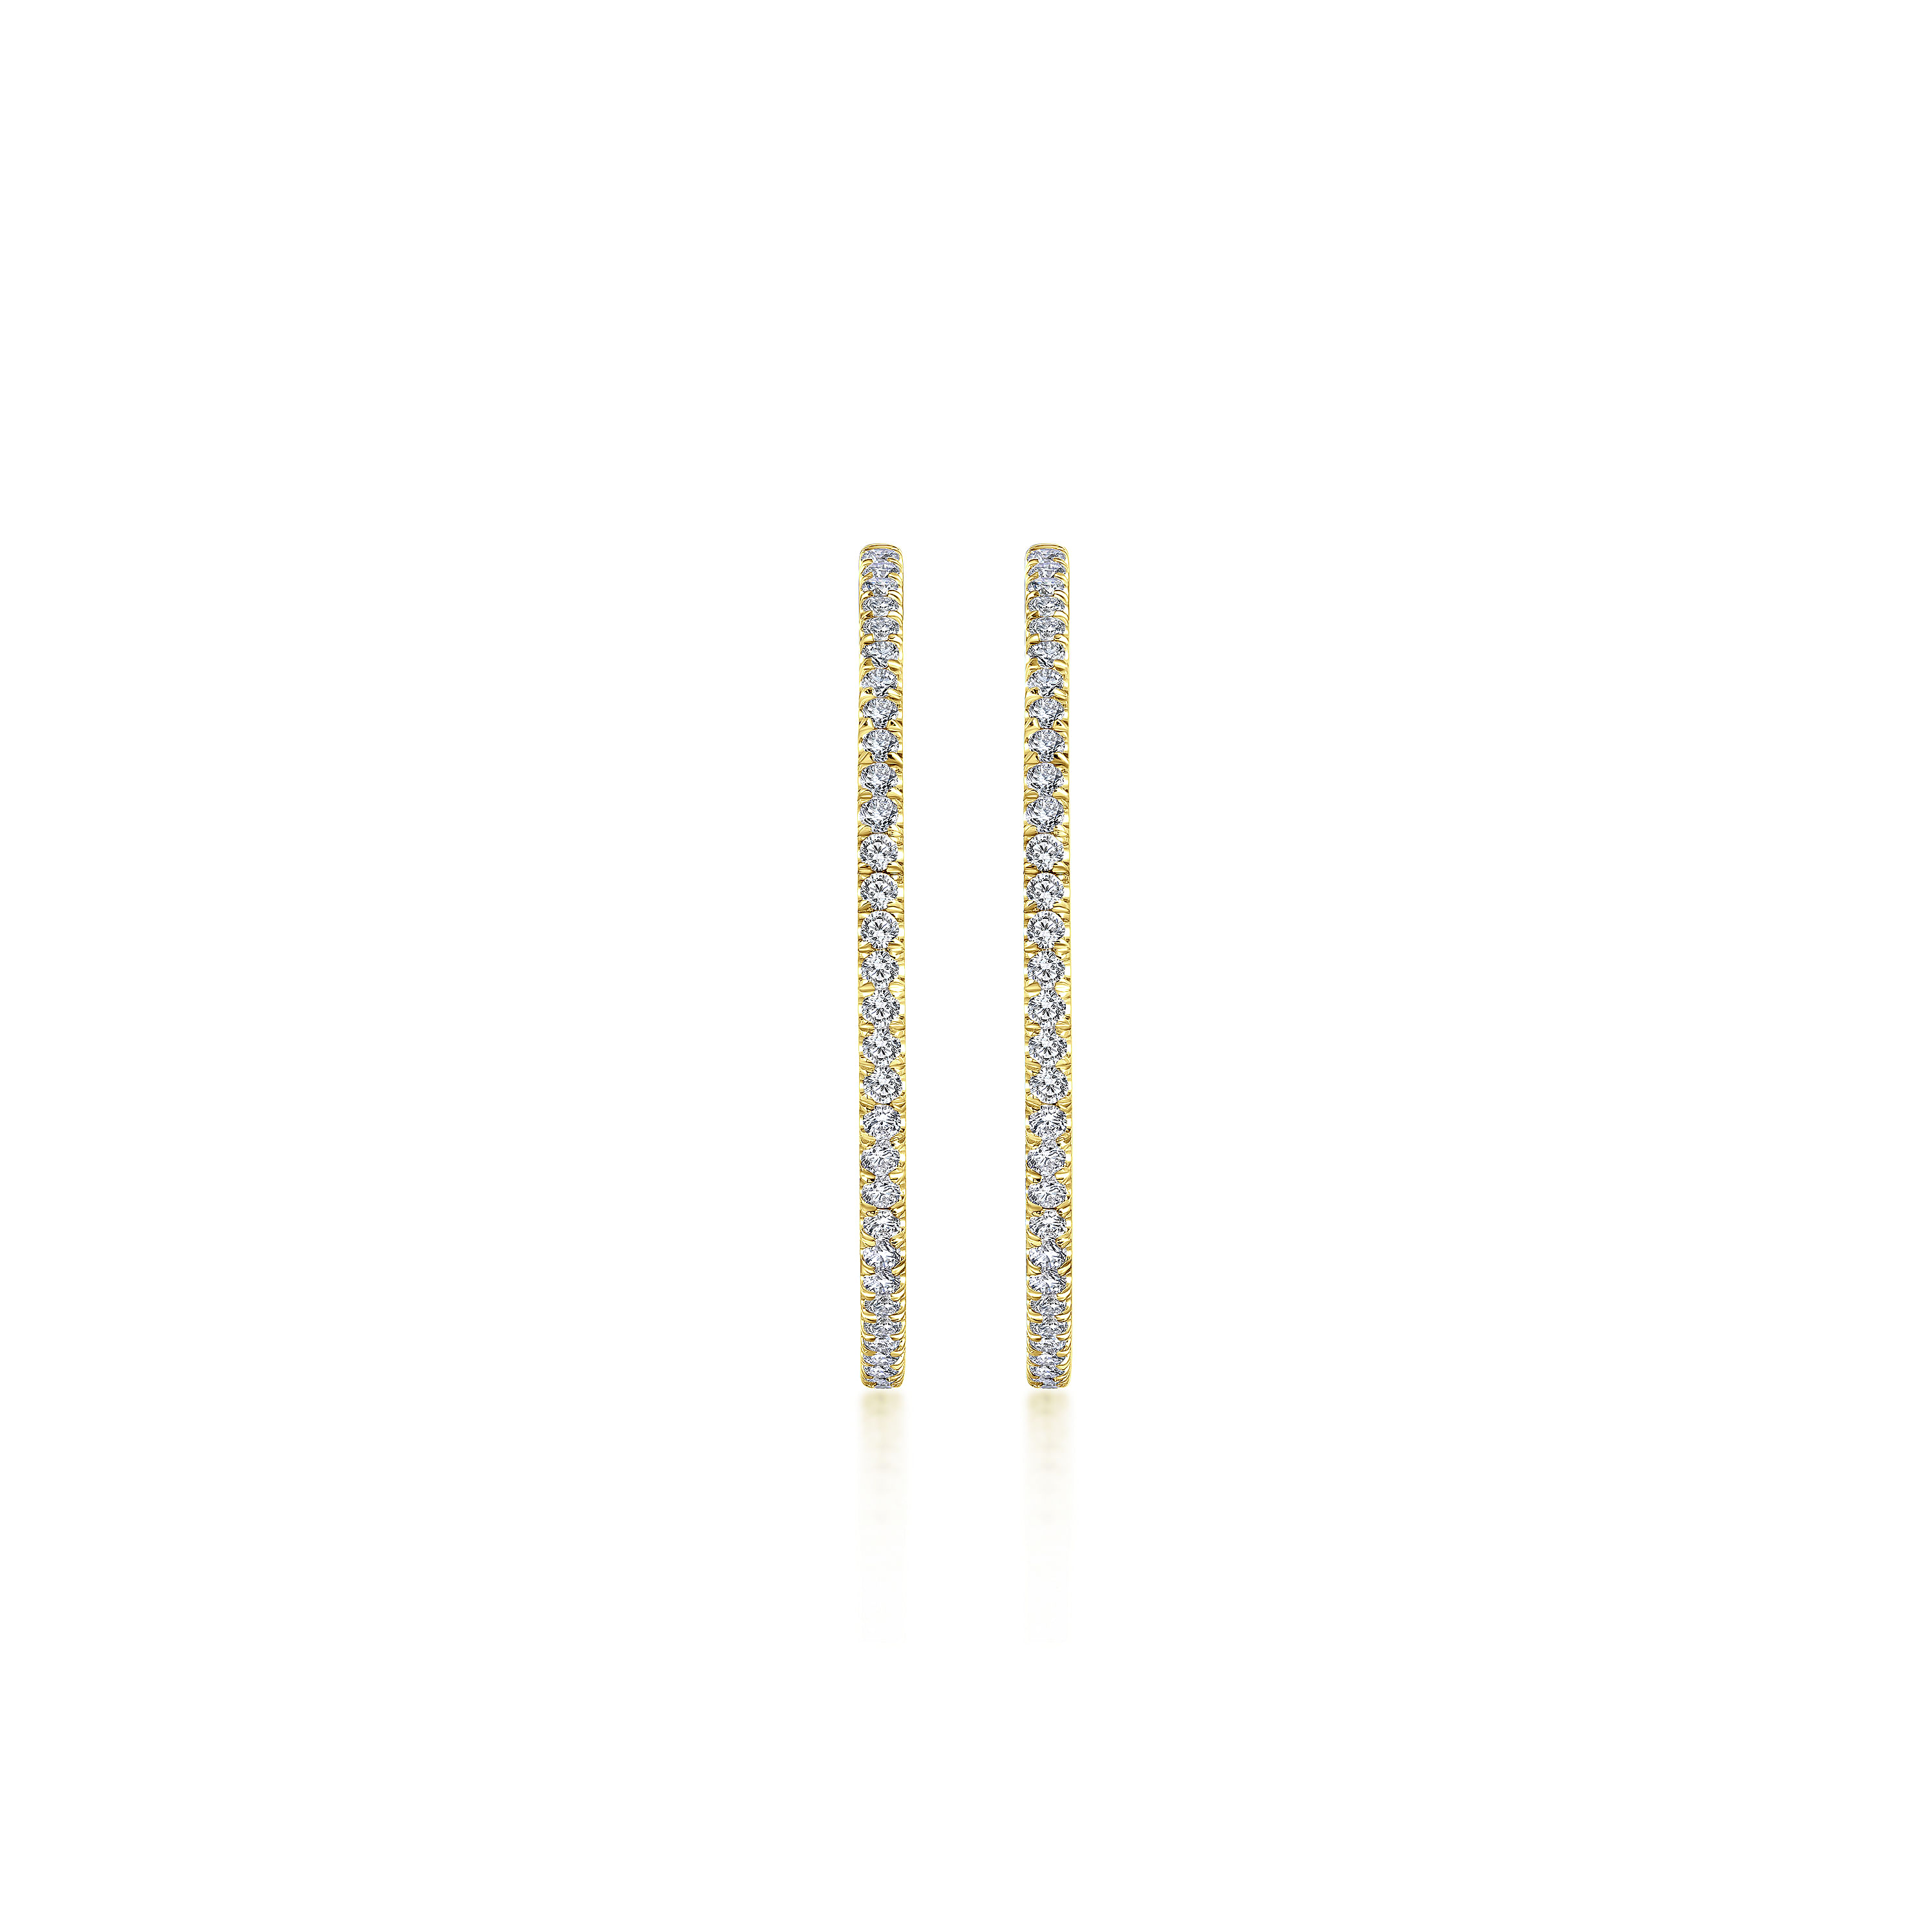 14K Yellow Gold French Pavé 40mm Round Inside Out Diamond Hoop Earrings